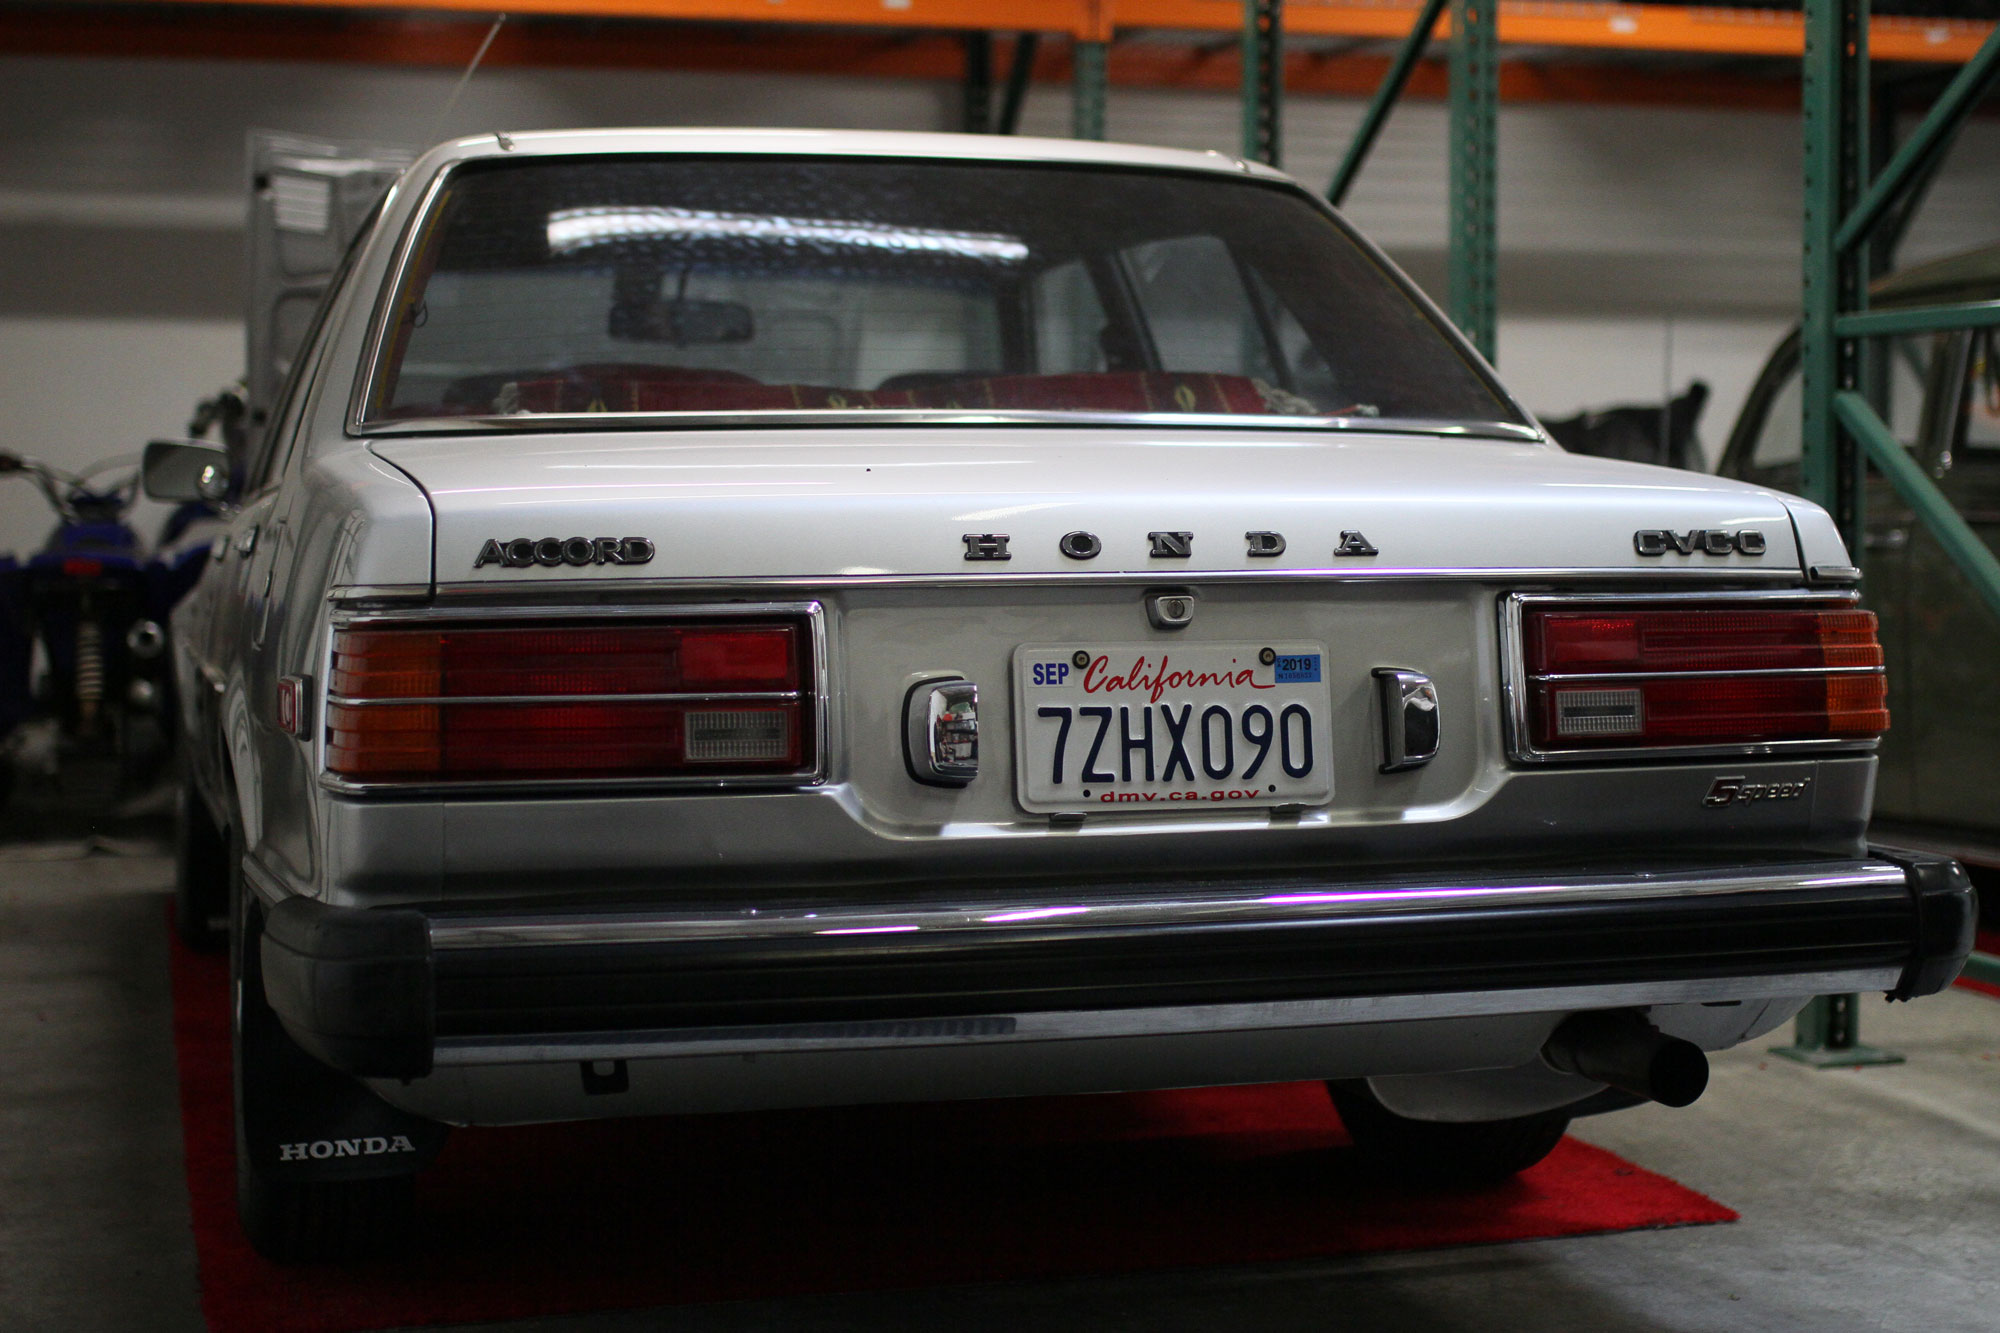 Honda Accord Sedan from 1979 from behind in the garage